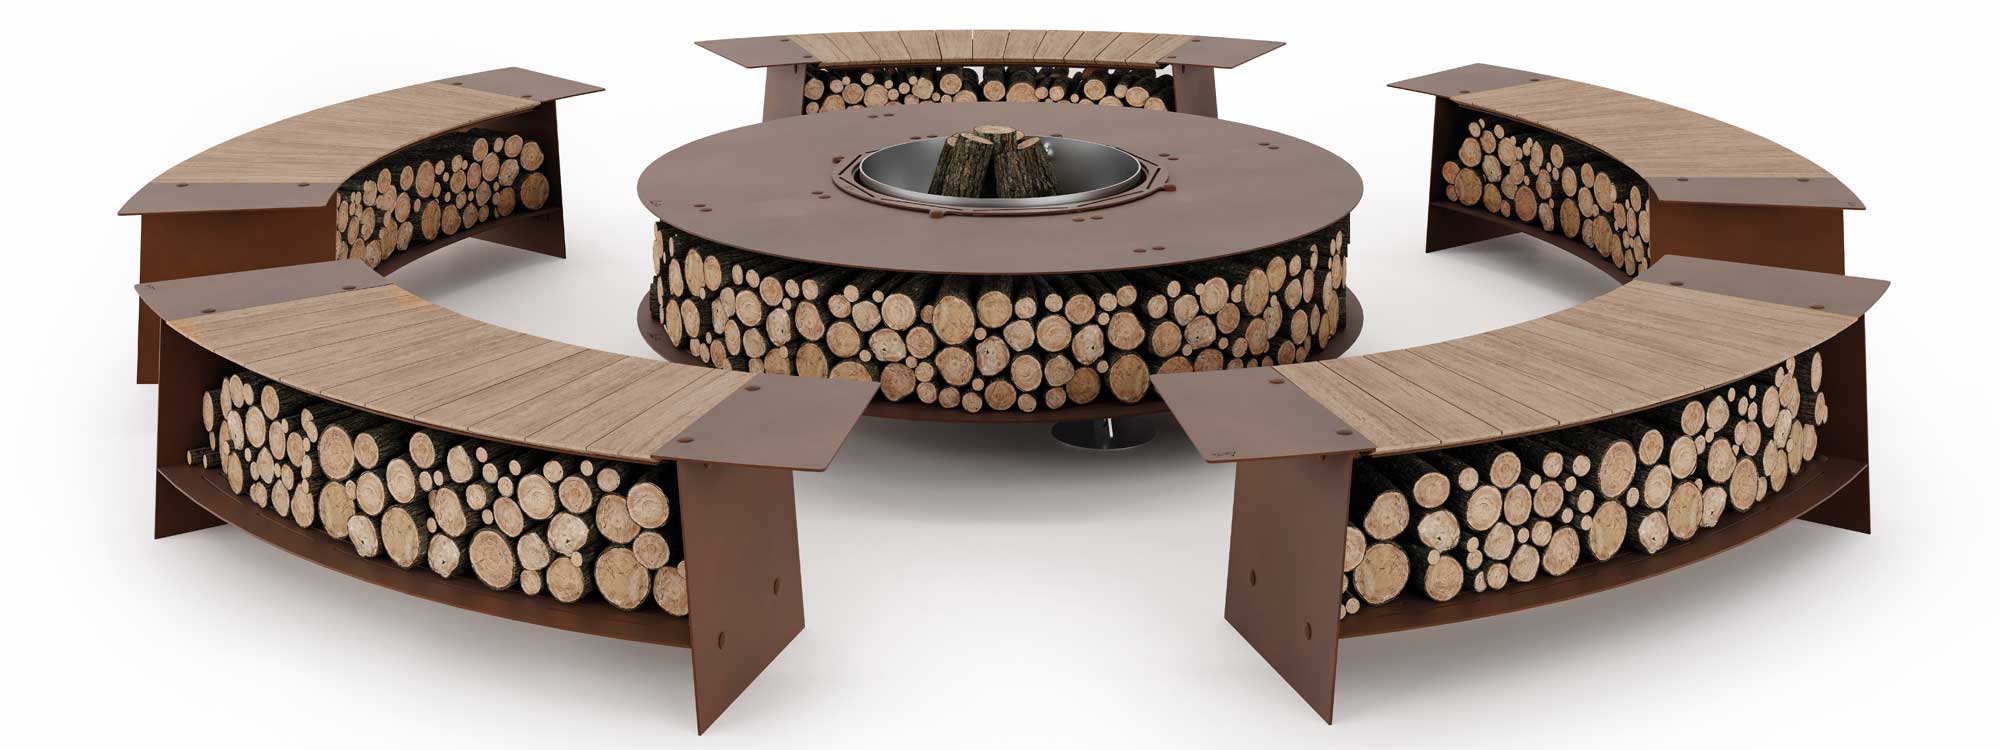 Studio image of Tobia curved garden benches around Zero fire pit by AK47 Design